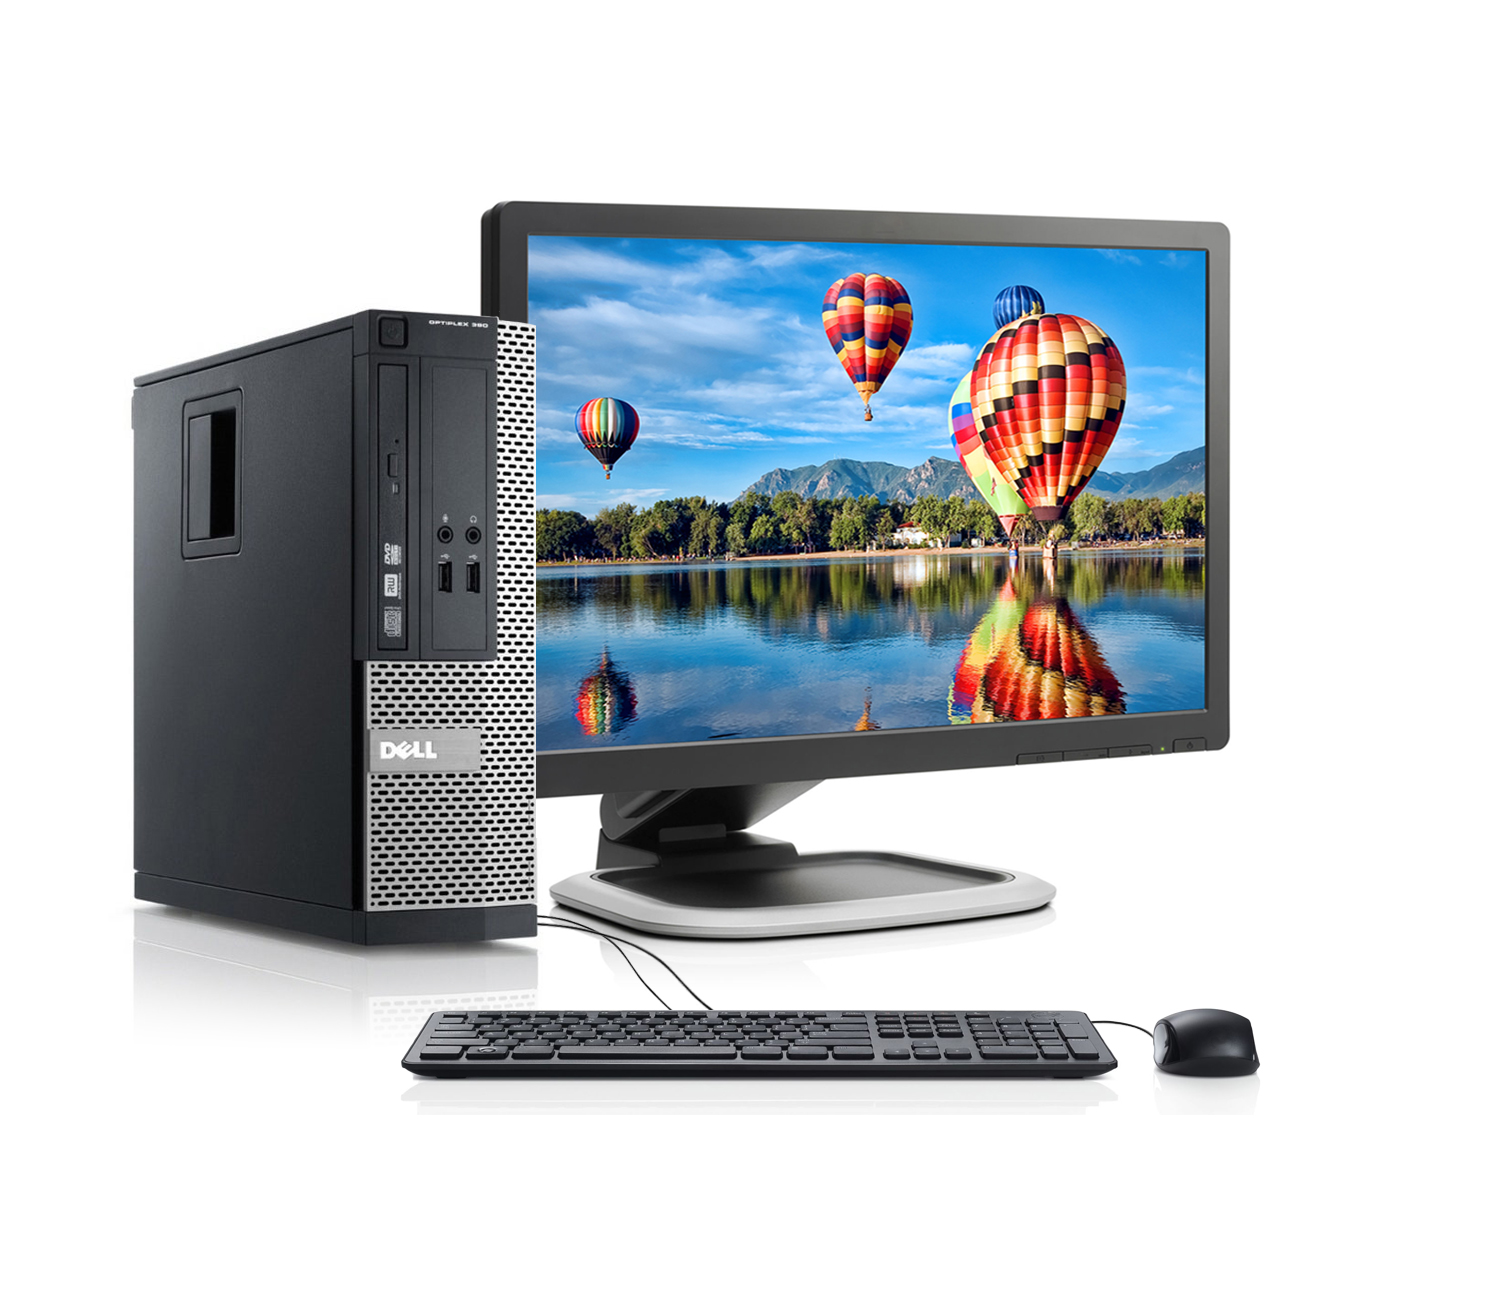 Dell Optiplex 390 SFF Desktop Intel Core i5-2400 (2nd Gen) 3.10GHz 4GB RAM 250GB HDD Windows 10 Home (UPGRADES AND MONITORS AVAILABLE)